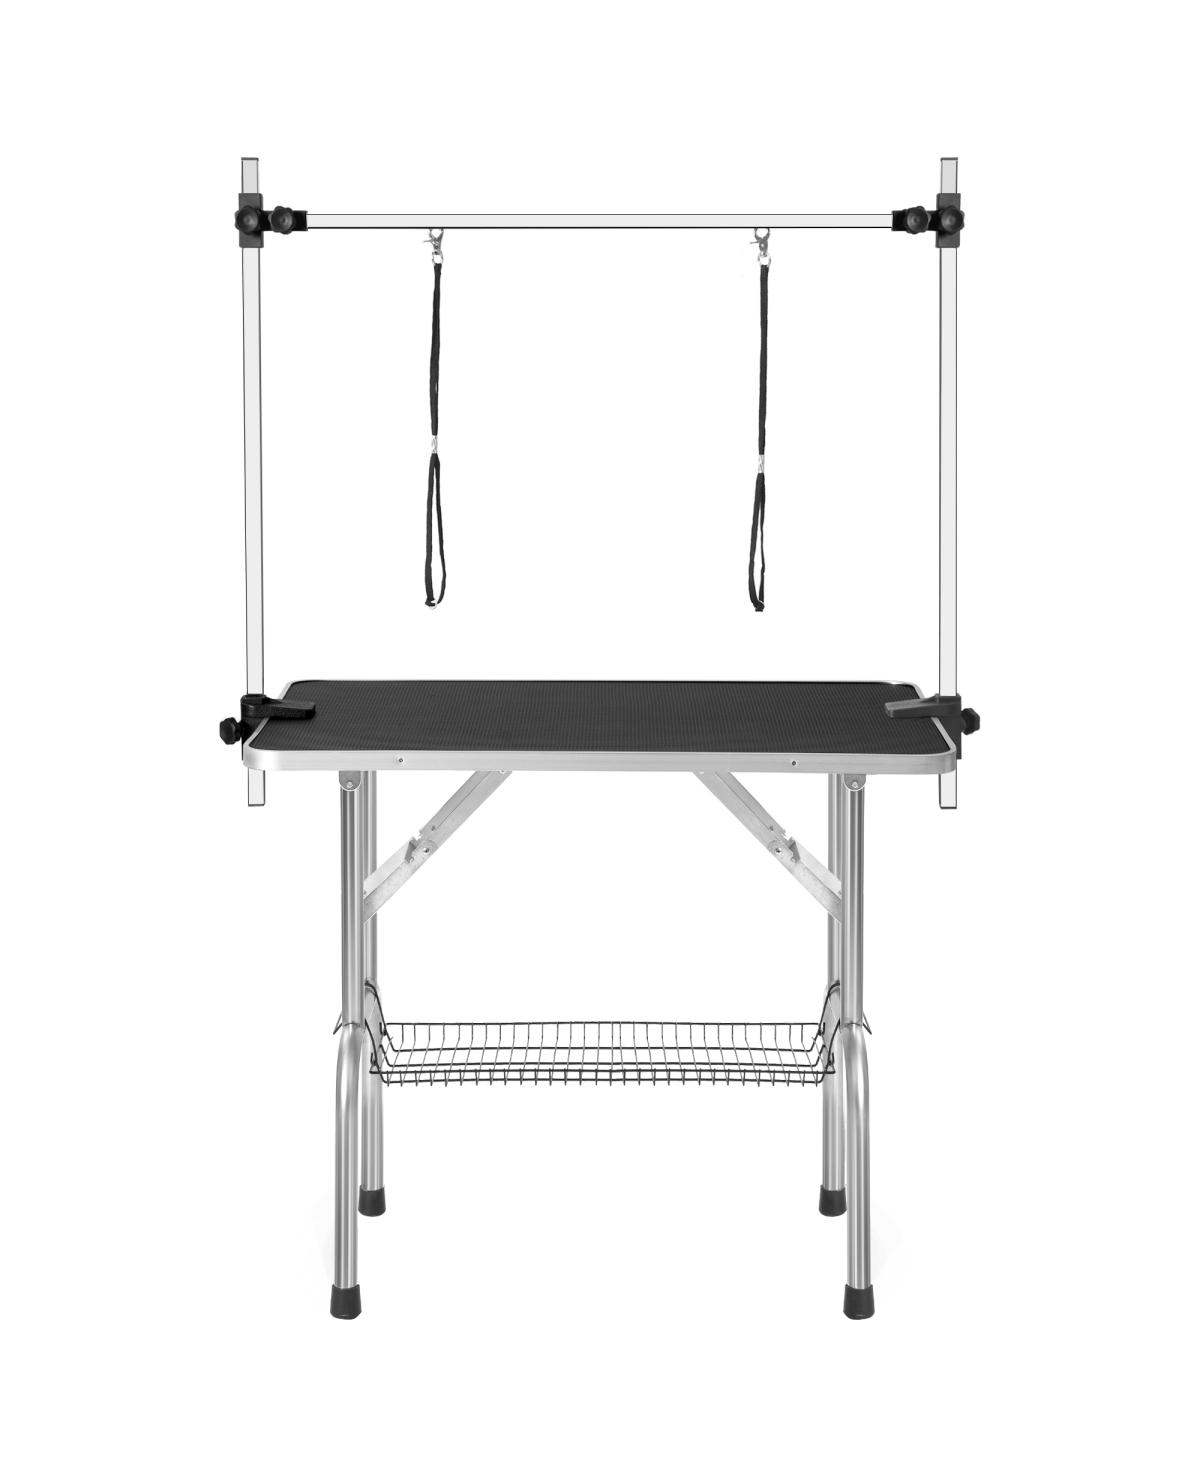 Professional Dog Pet Grooming Table Large Adjustable Heavy Duty Portable with Arm & Noose & Mesh Tray - Black